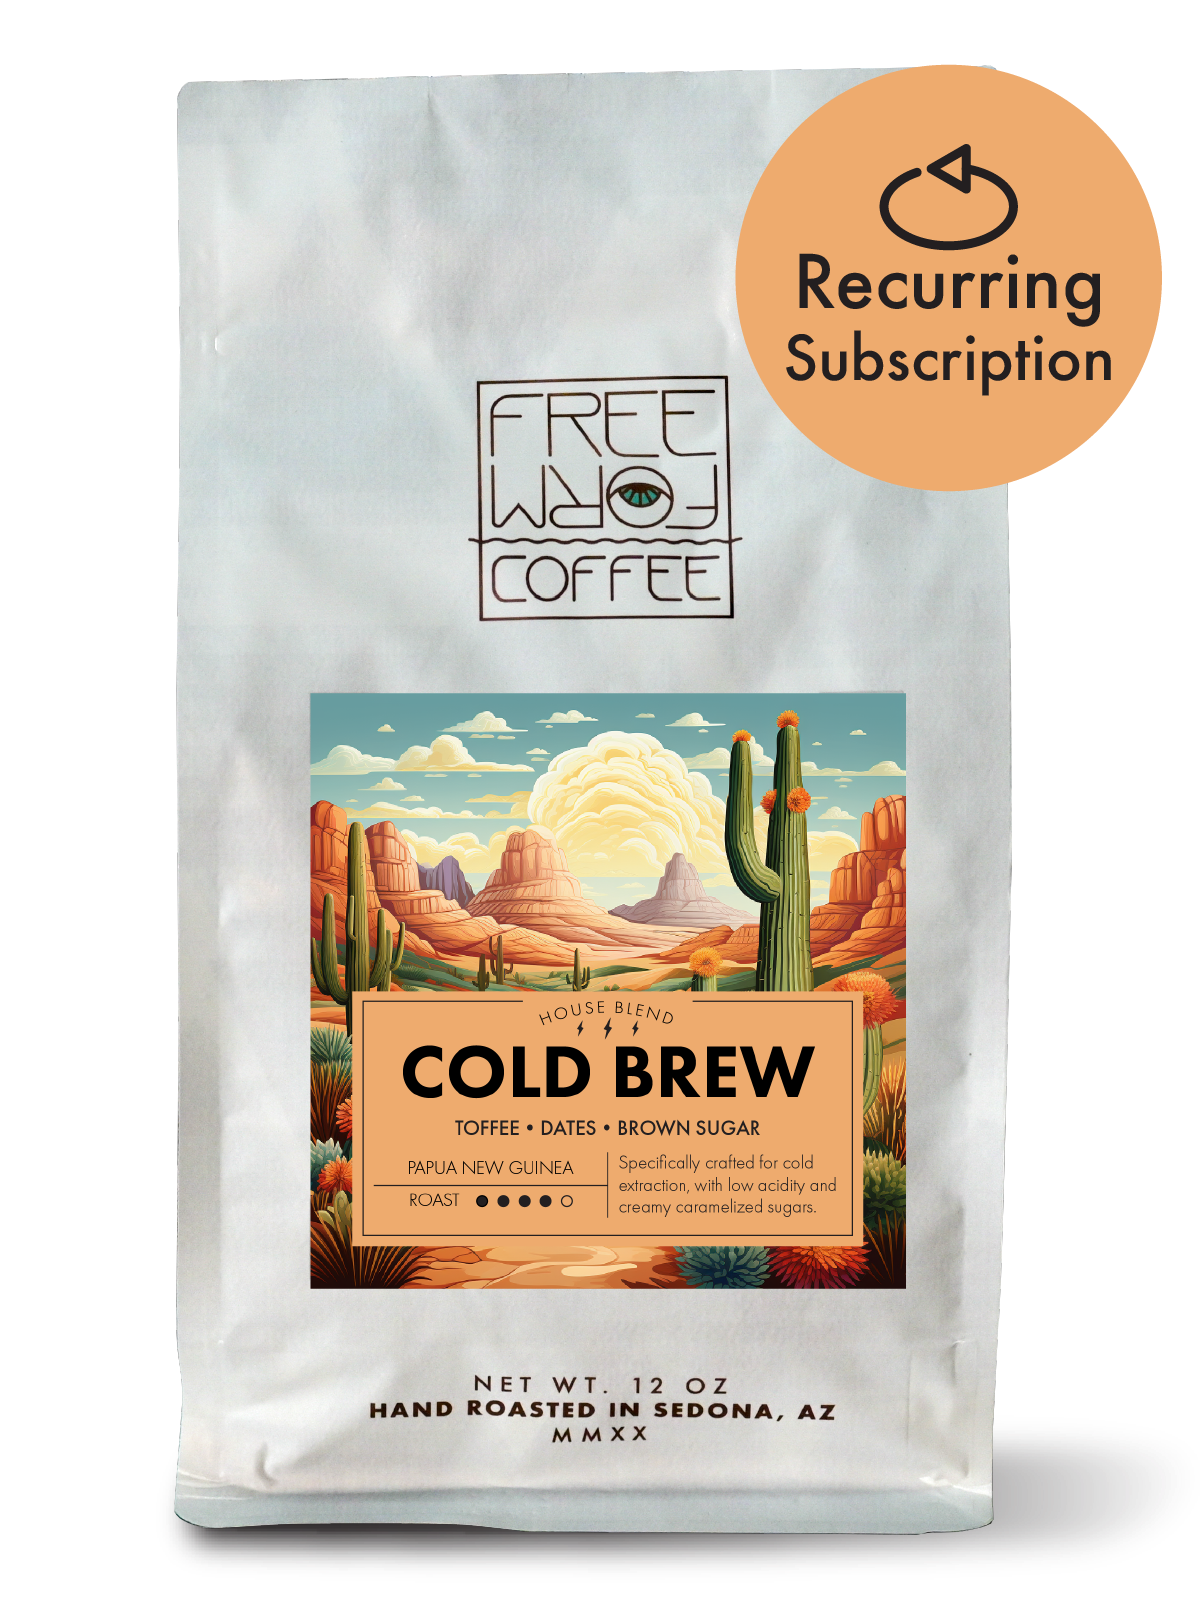 Cold Brew Subscription